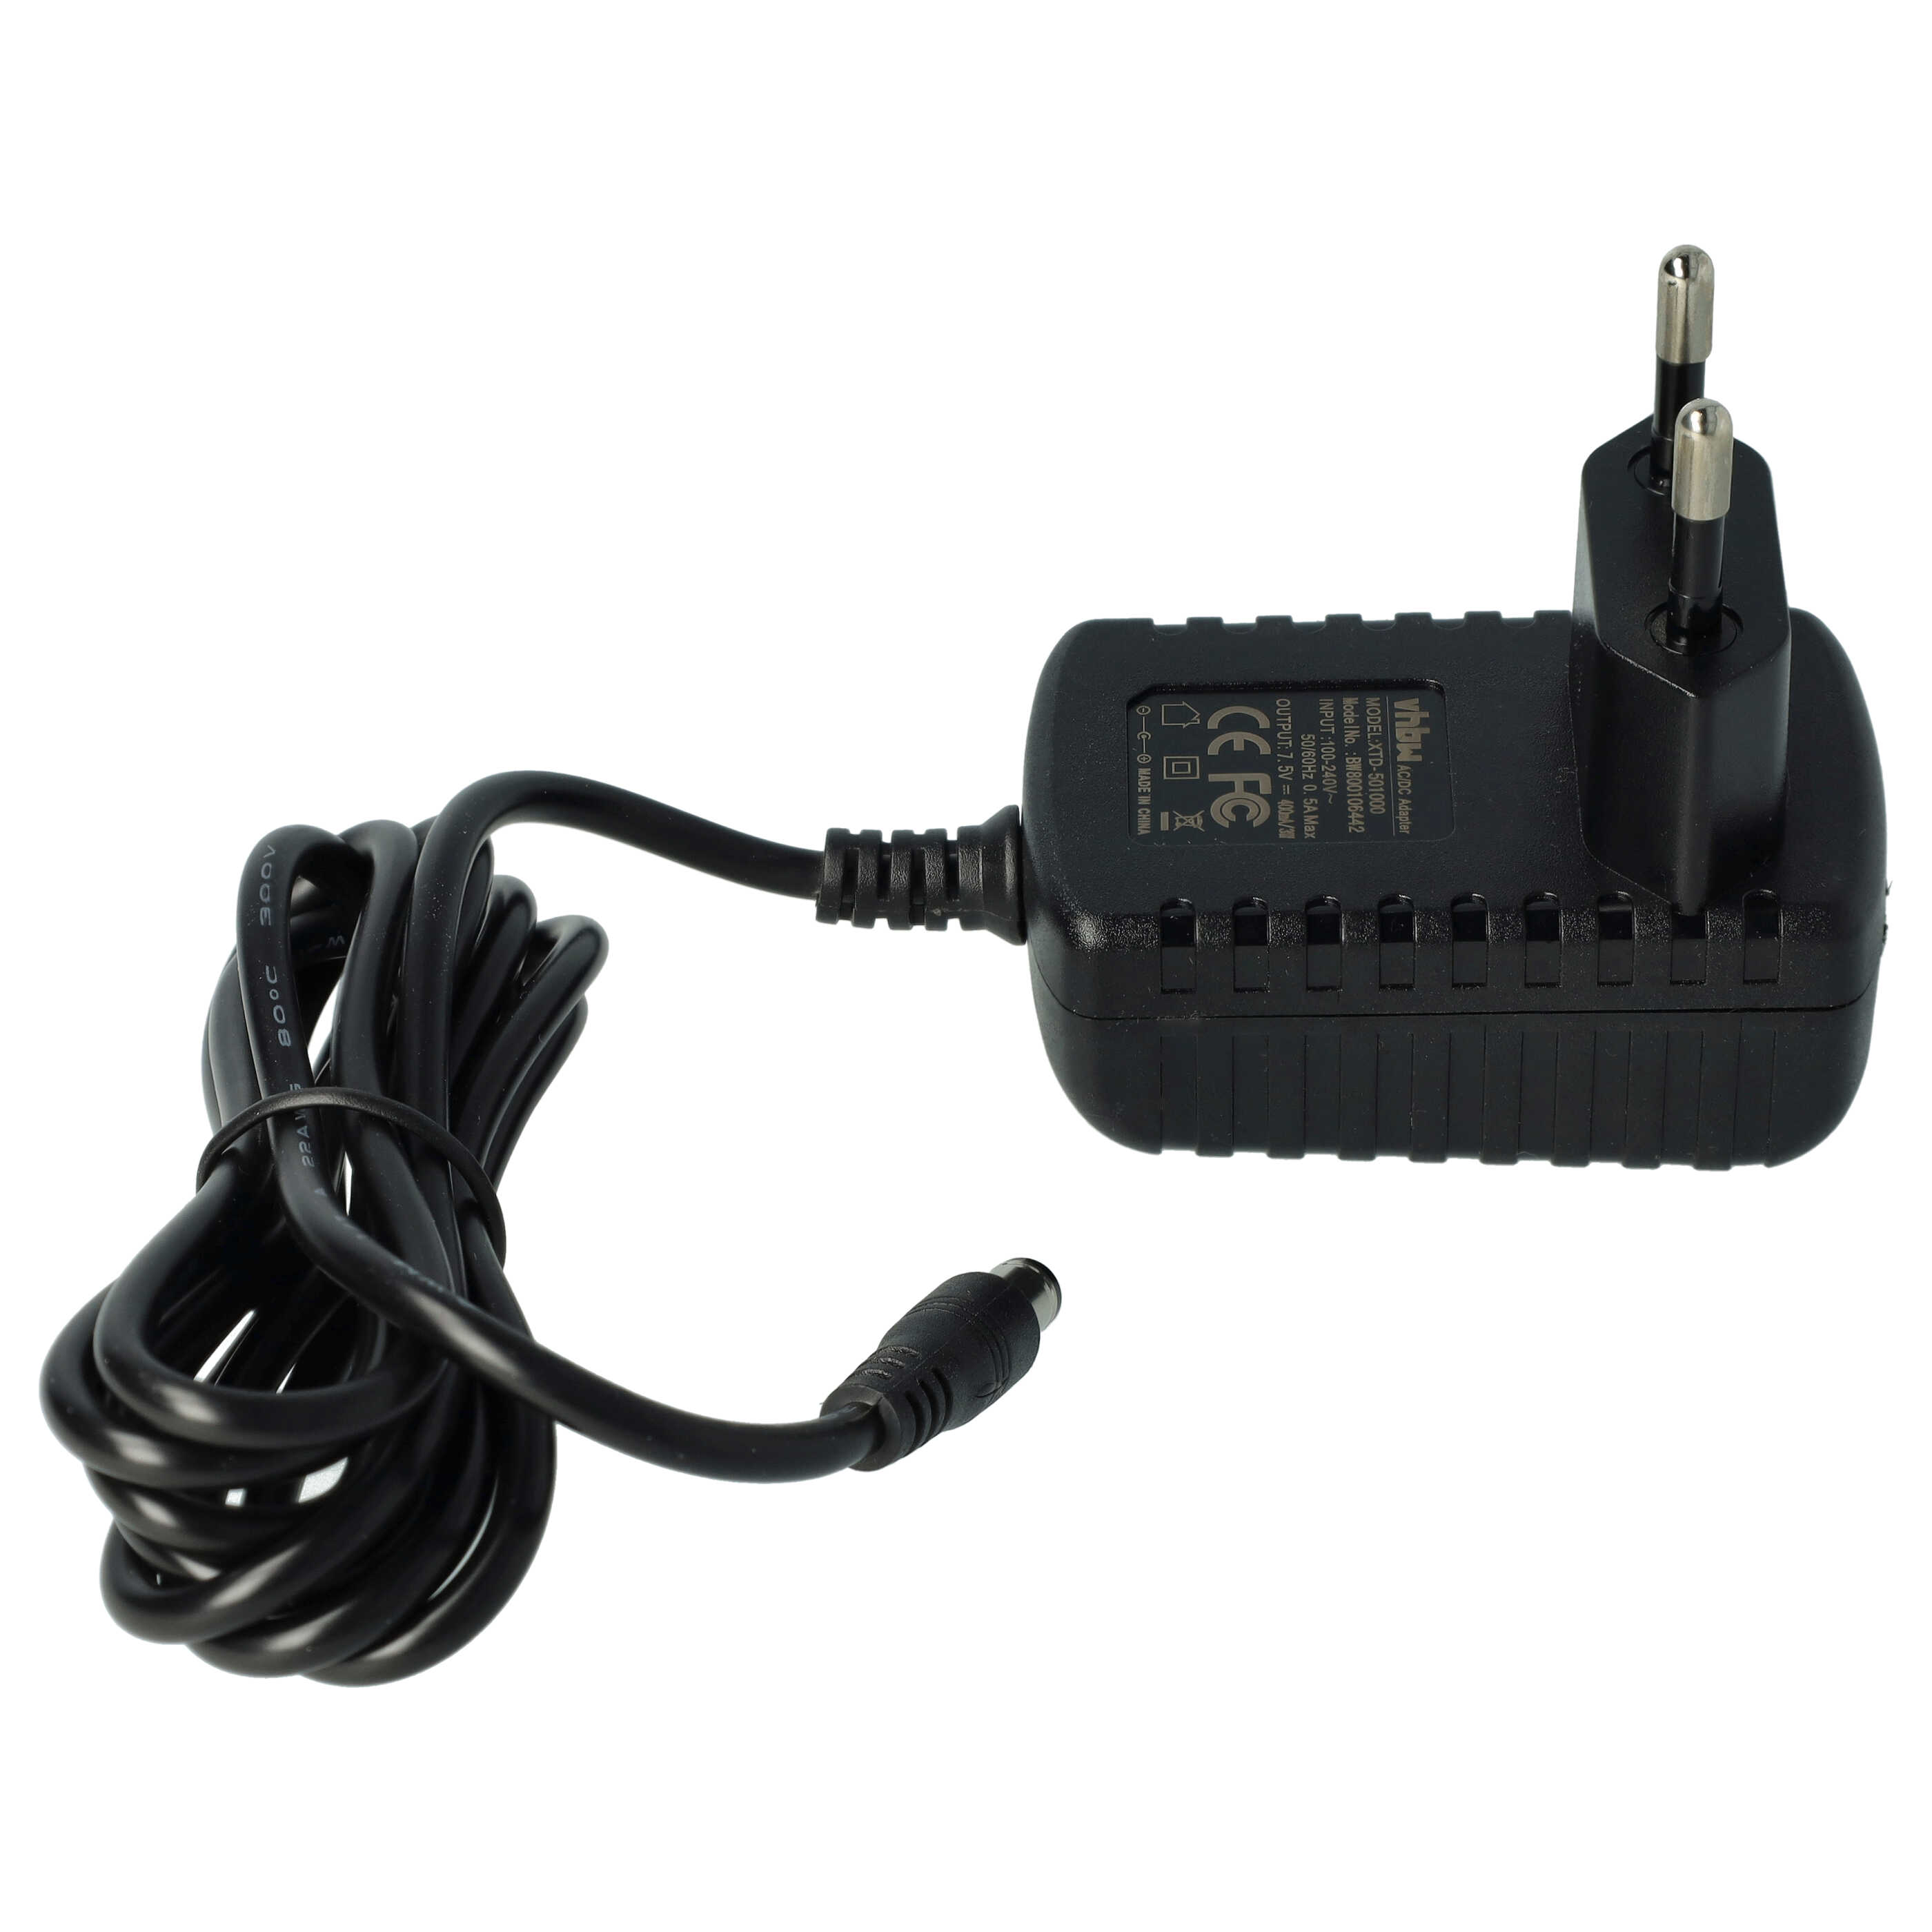 Mains Power Adapter replaces V-Tech 80-002181 for V-Tech Educational Toy, Learning Tablet - 110 cm